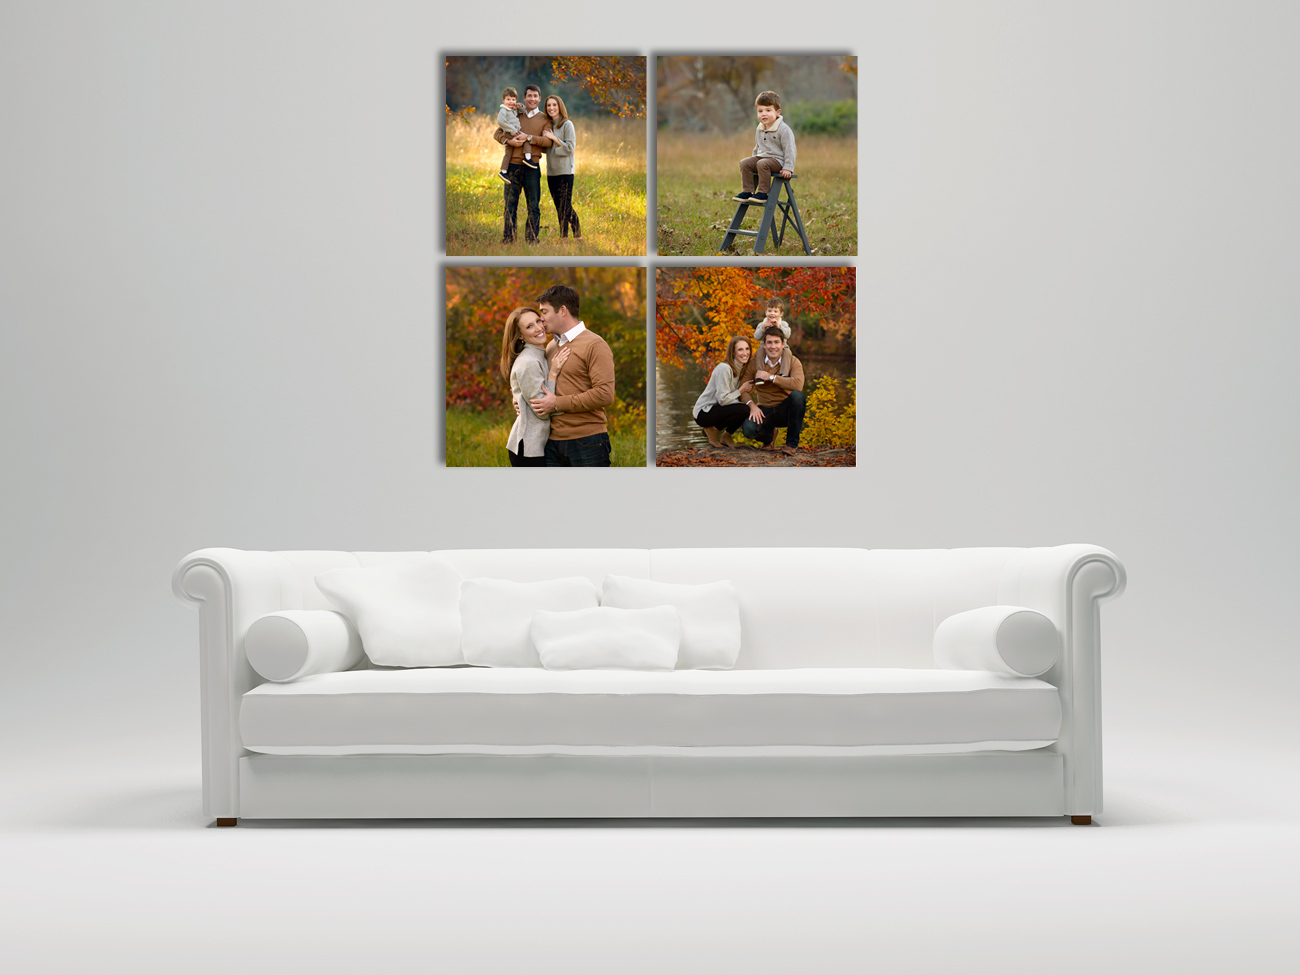 Wall photo display of four 20x20 images. 